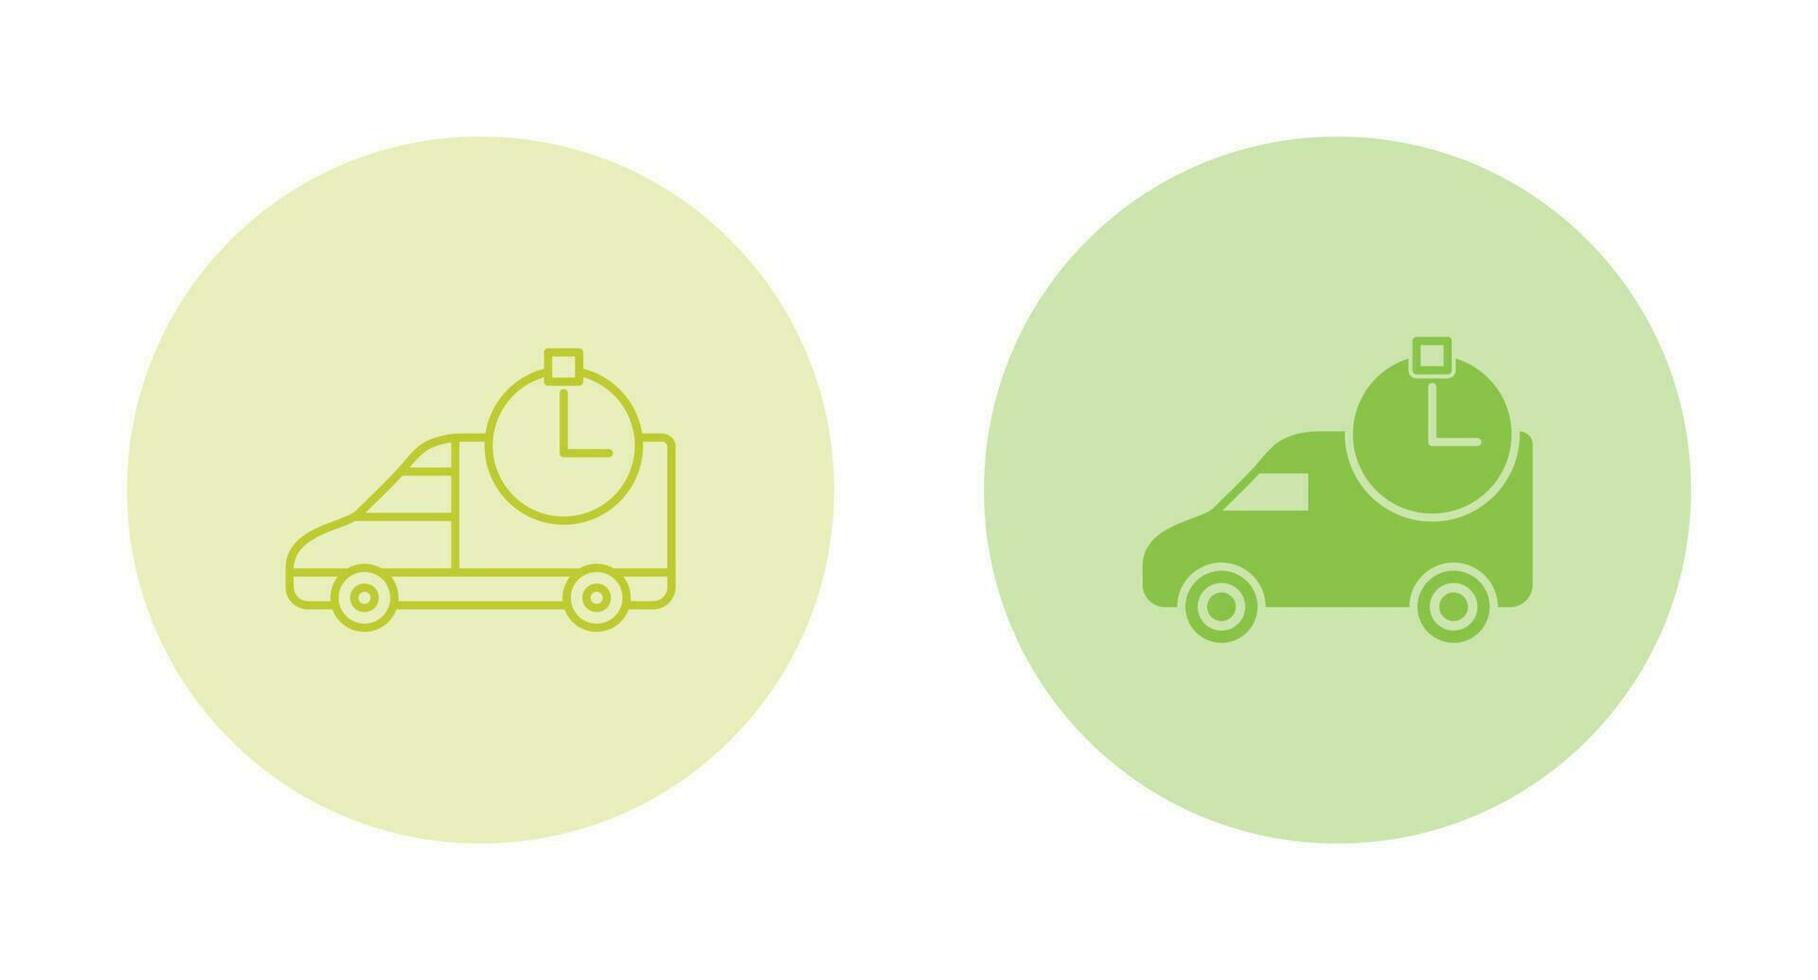 Time Based Delivery Vector Icon